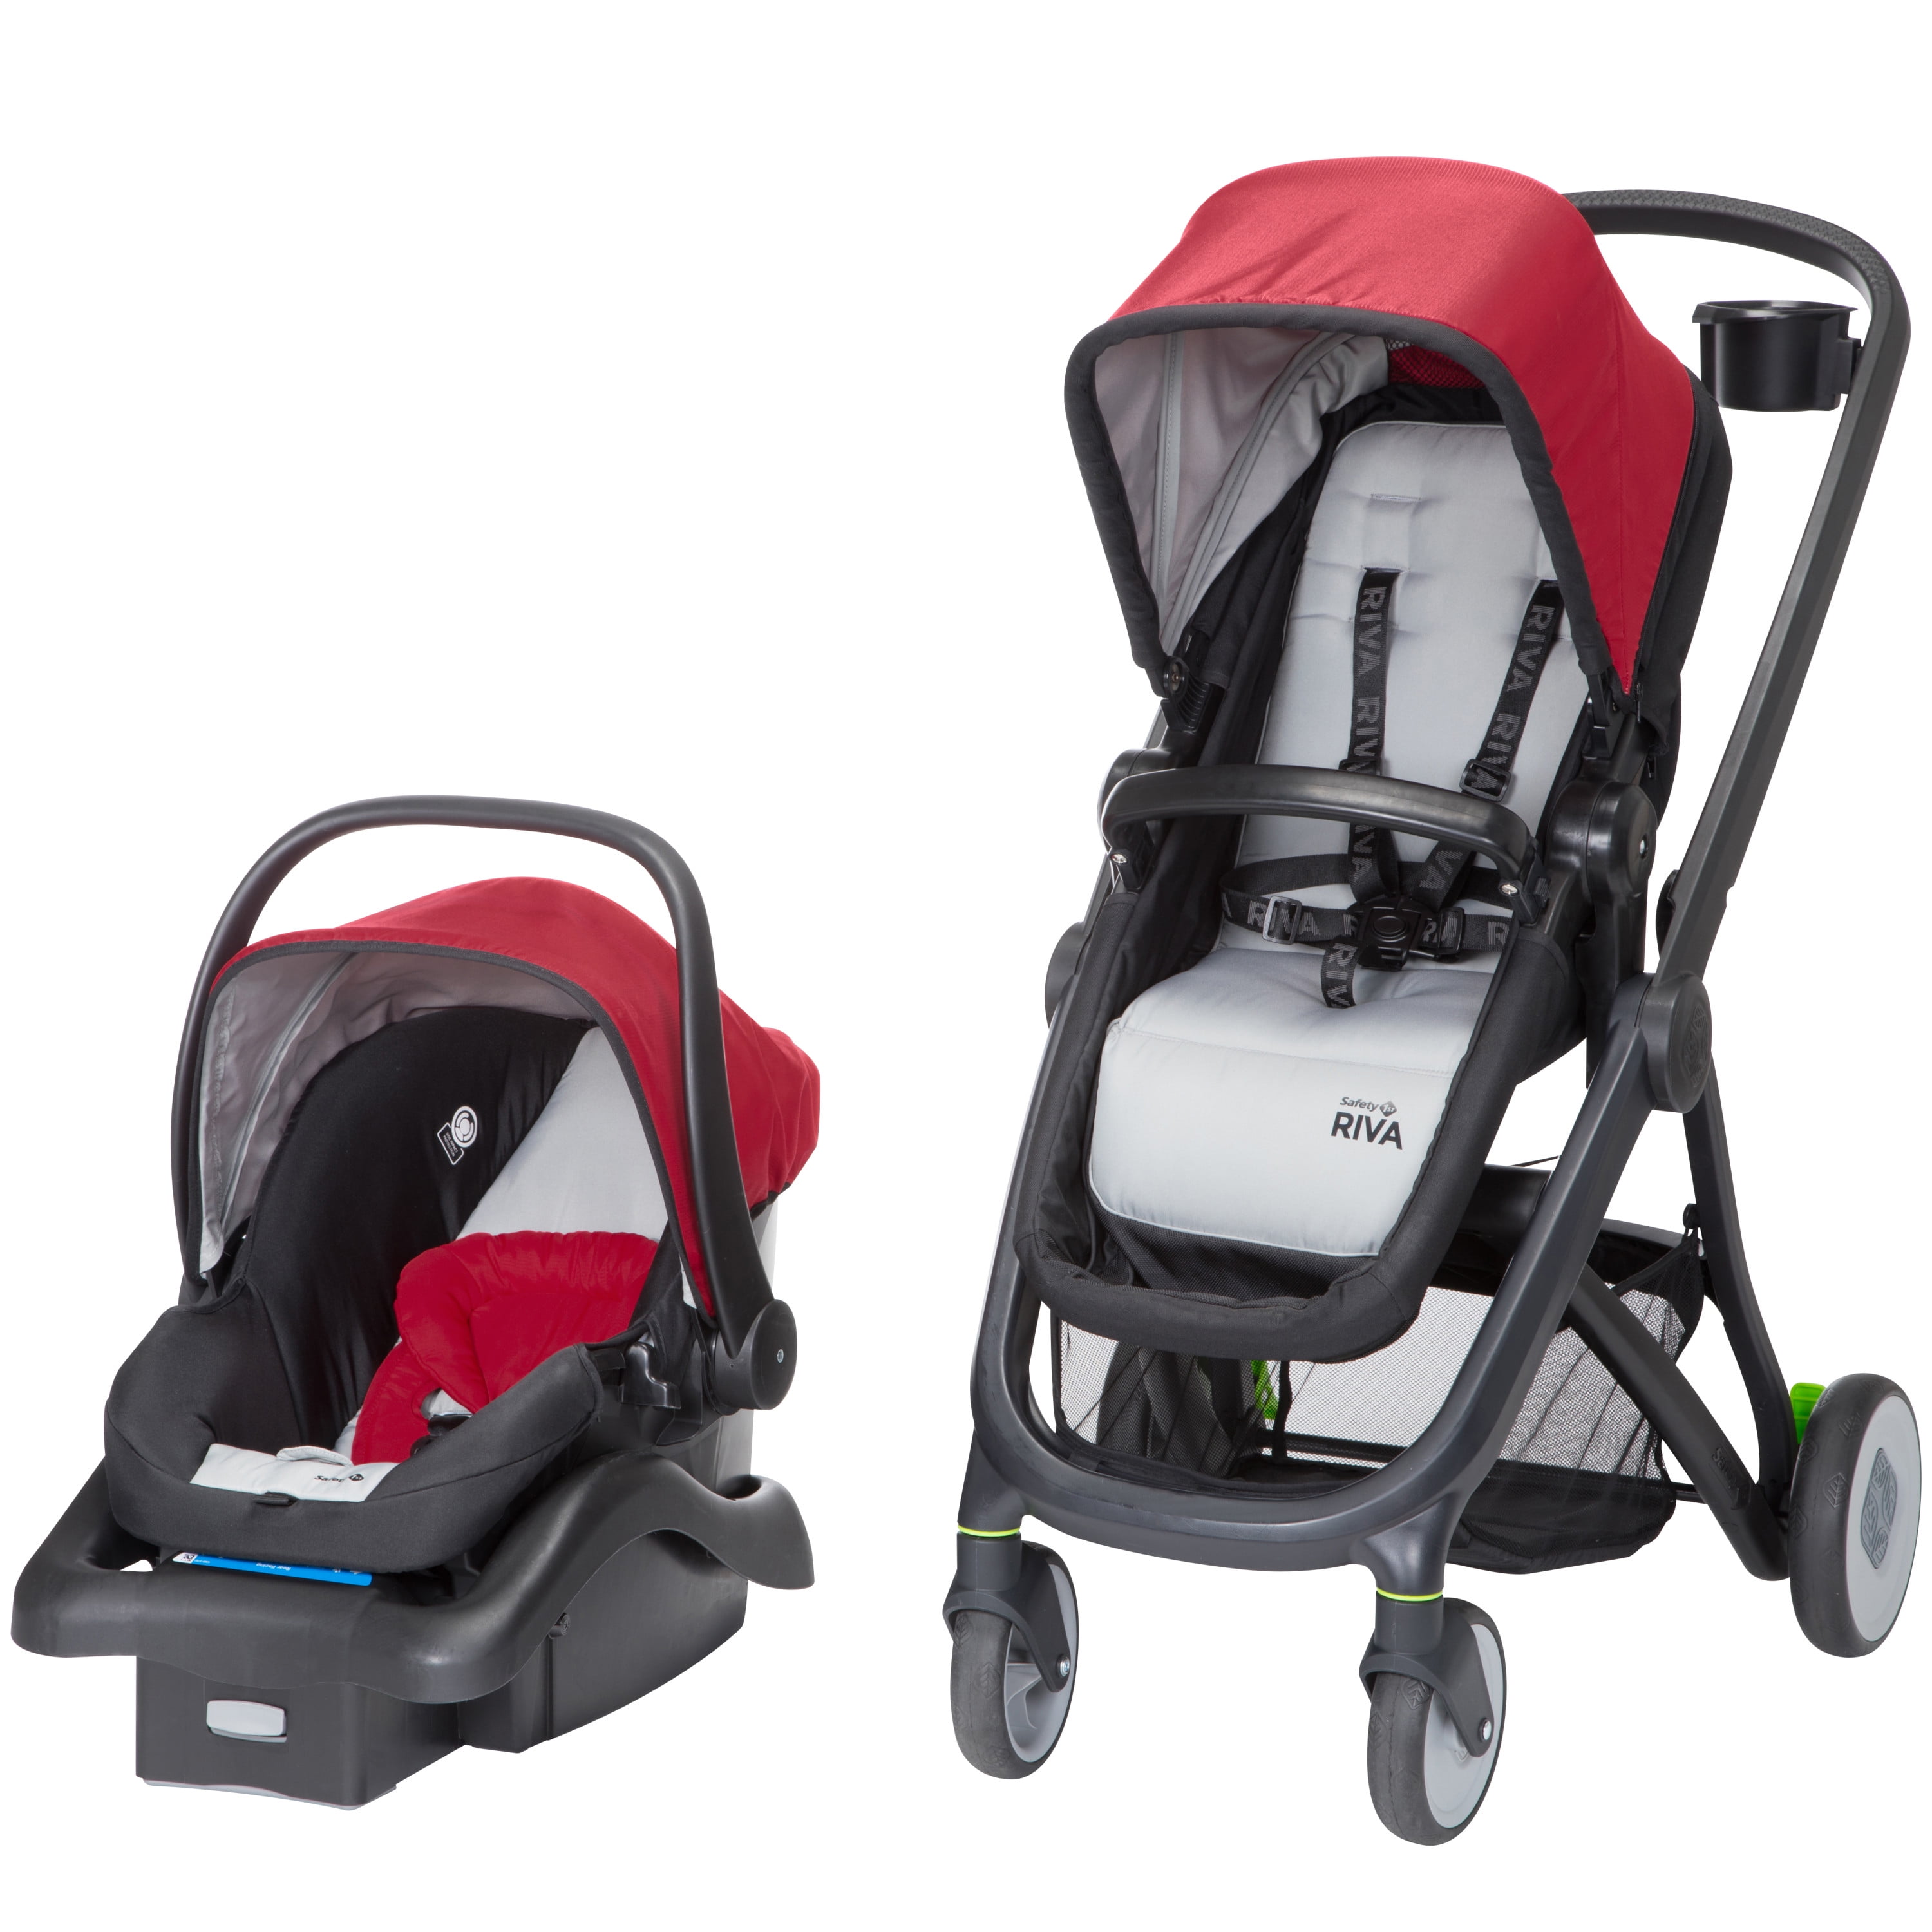 6 in 1 travel system